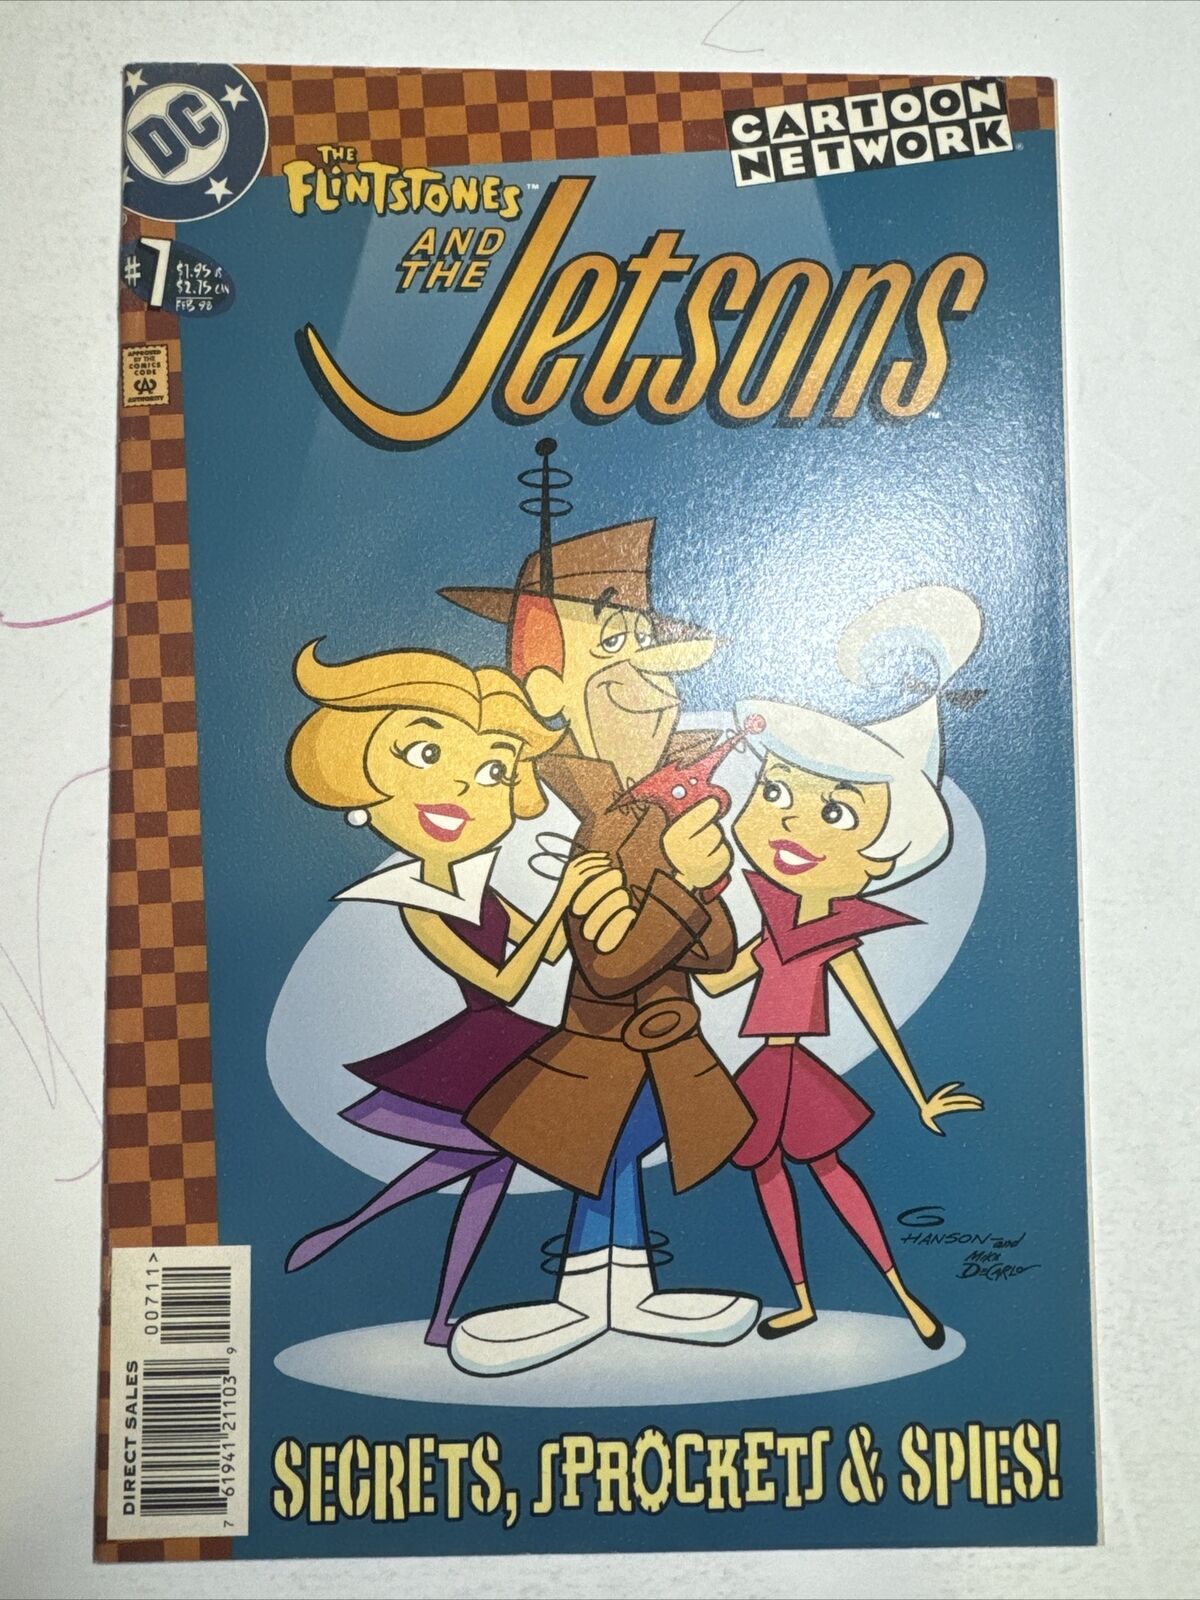 Flintstones and The Jetsons #7: “The Spy Who Grounded Me” DC Comics 1998 FN/VF